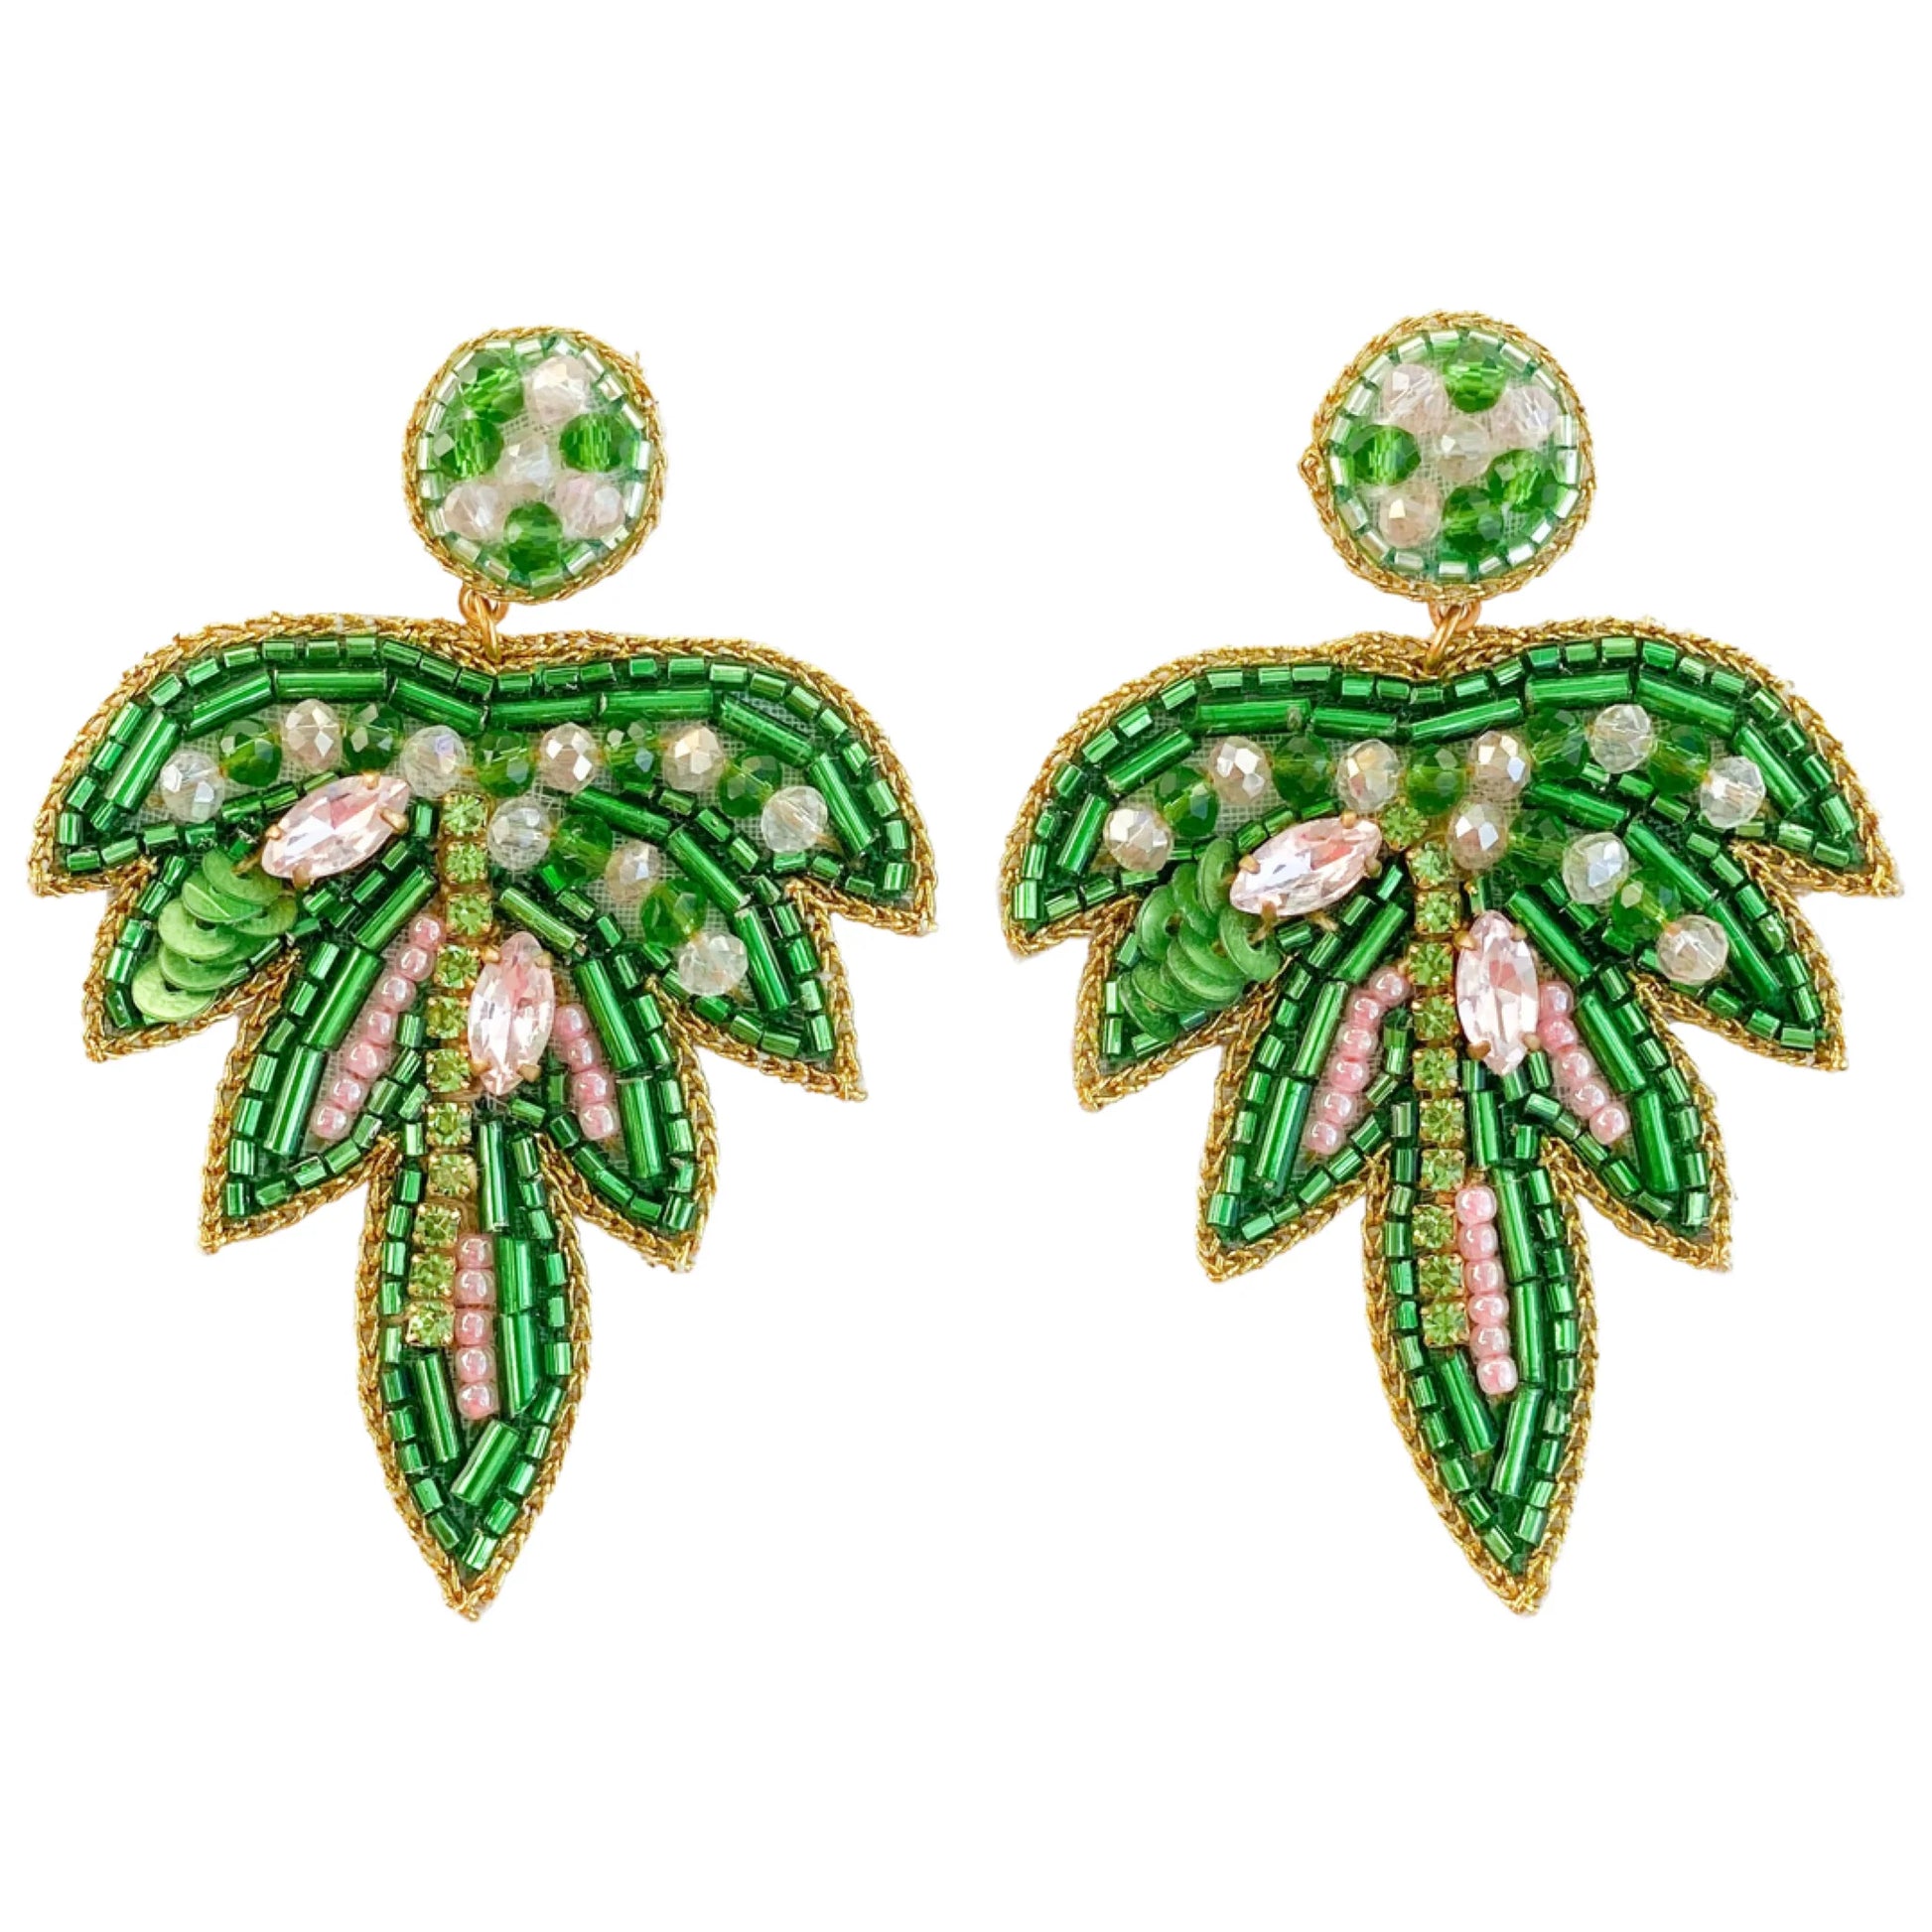 Our Palm Beach Earrings are designed by us in USA and handmade in Jaipur, India by women artisans using high quality beads, gemstones and crystals, they are hypoallergenic with a 14k gold plated post. Their base is a very soft suede fabric, making them VERY lightweight. You will not feel you are wearing earrings!